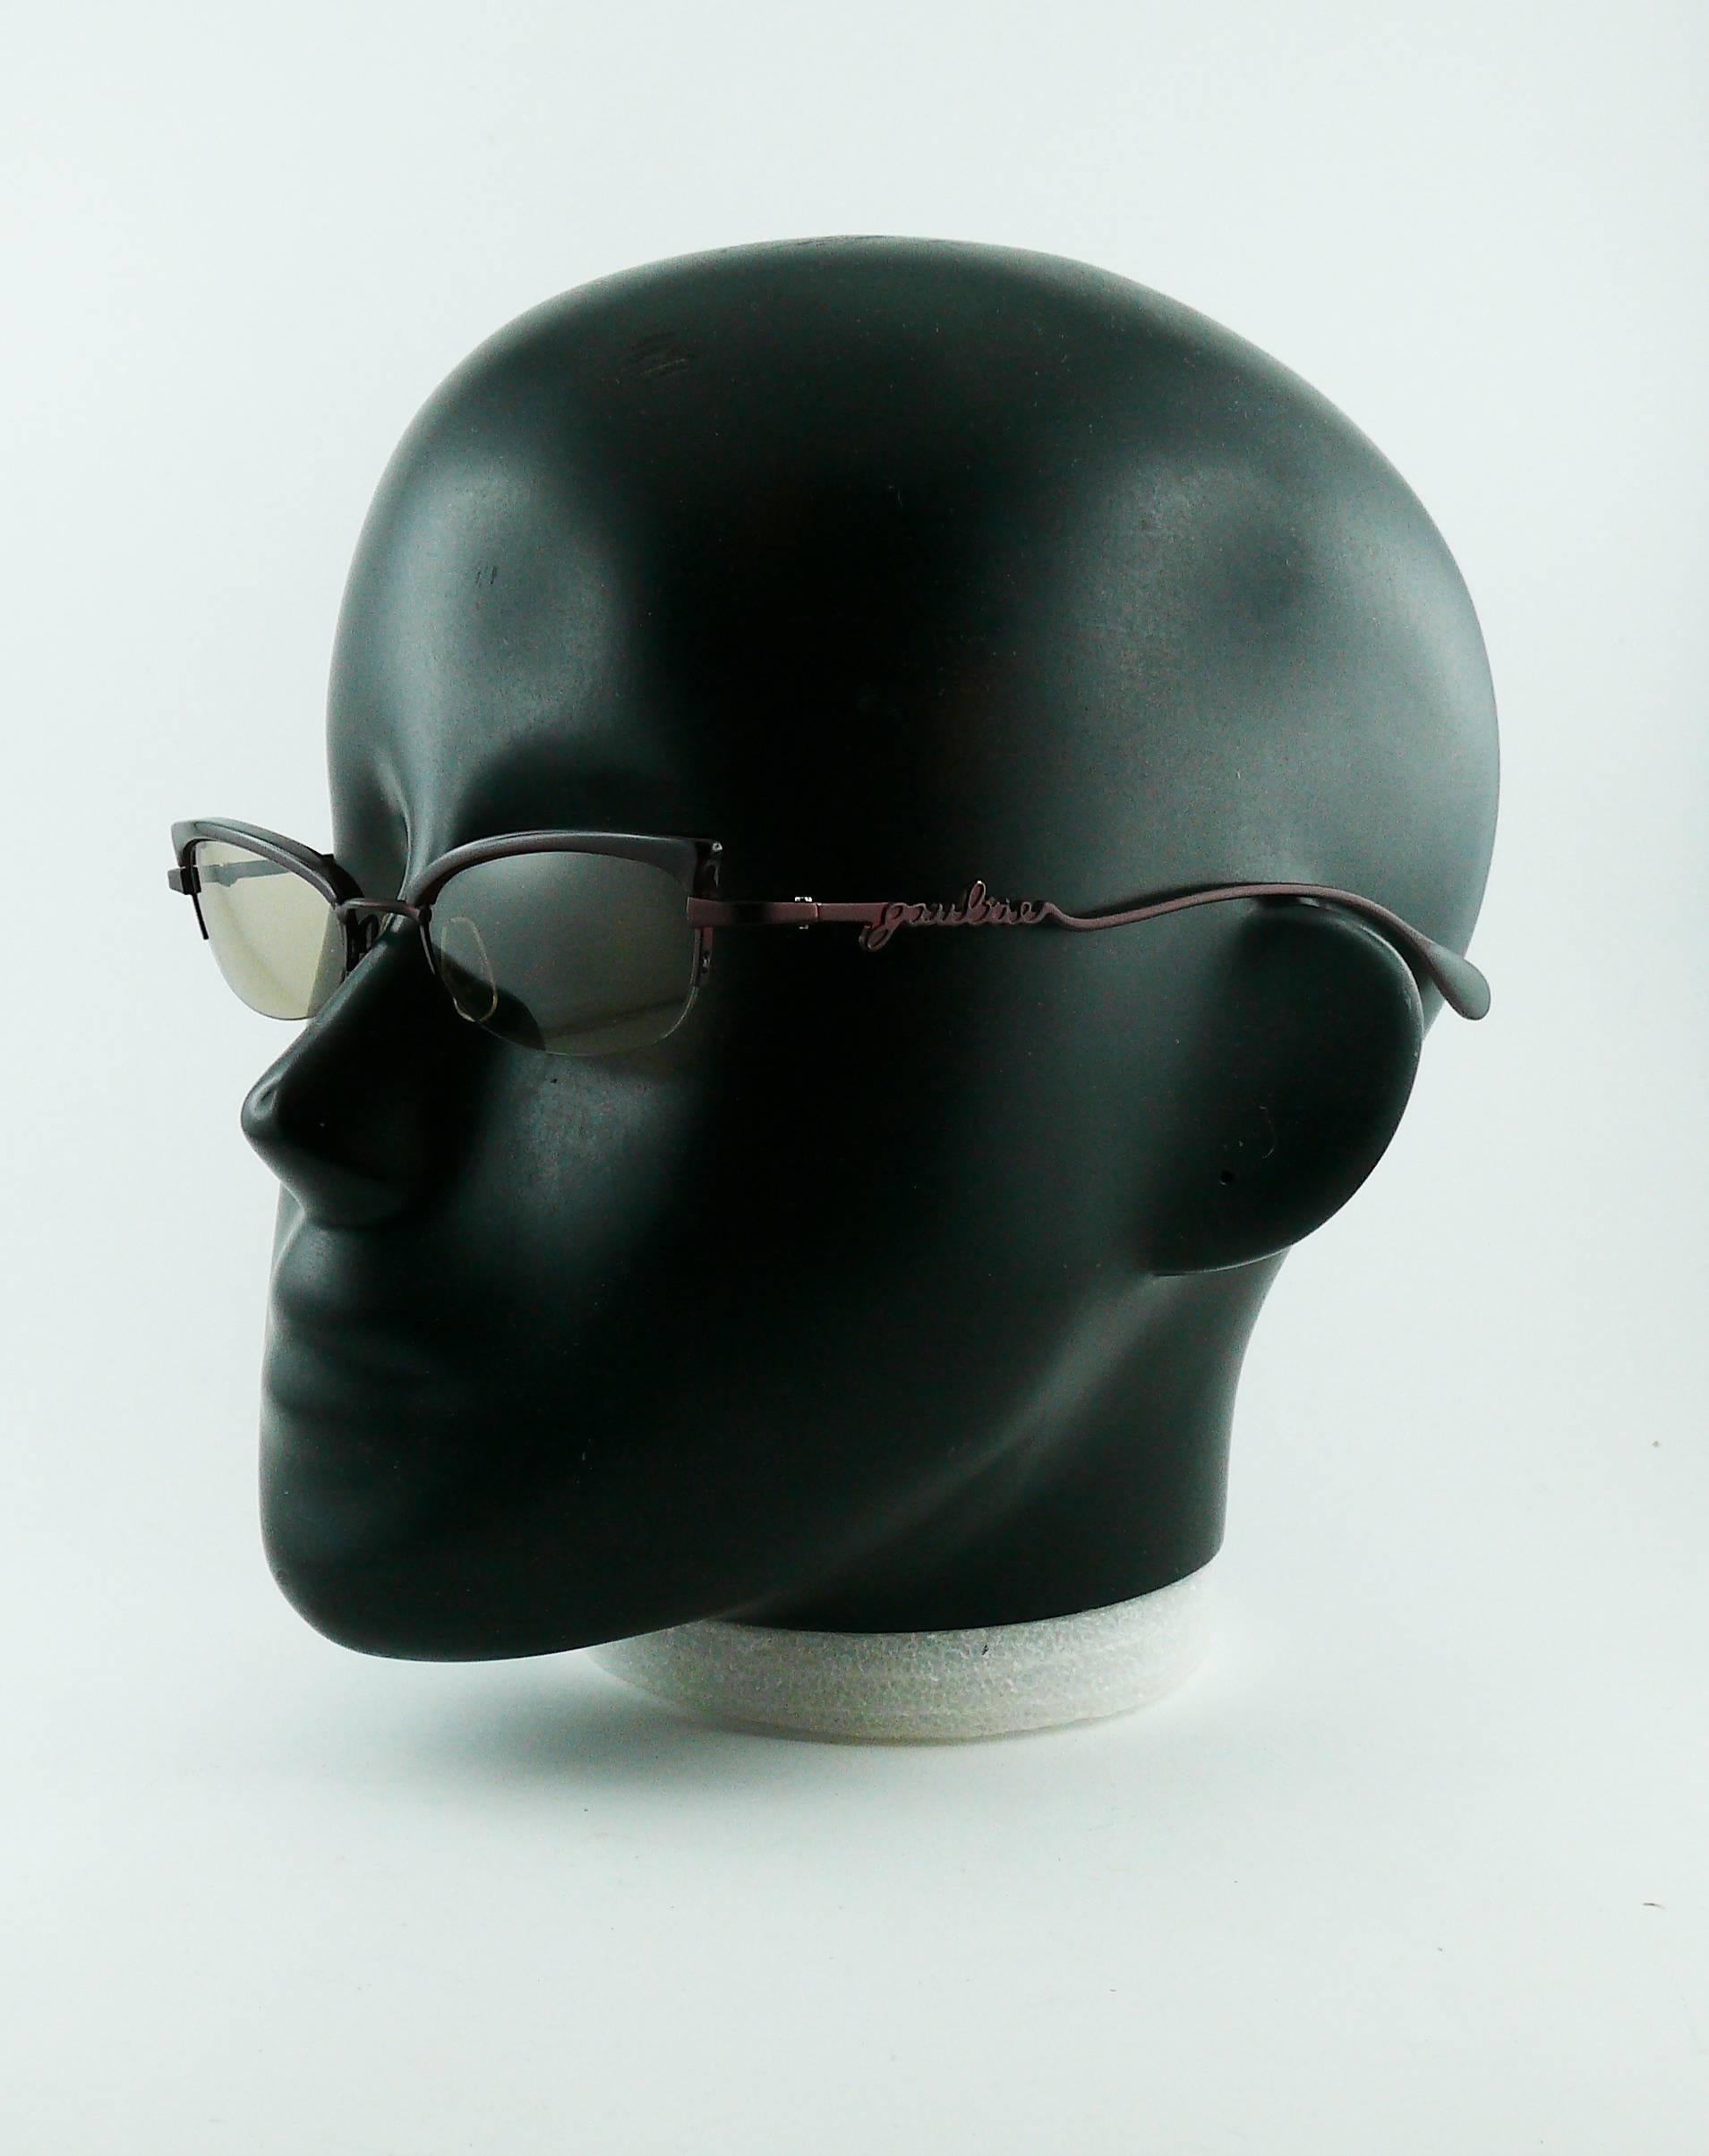 JEAN PAUL GAULTIER rare cat eye sunglasses.

Deep ruby red frames.
Tinted lenses.

Marked JEAN PAUL GAULTIER.
56-0069.

Indicative measurements : width approx. 13.9 cm (5.47 inches) / width between lenses approx. 1.6 cm (0.63 inch) / lenses width